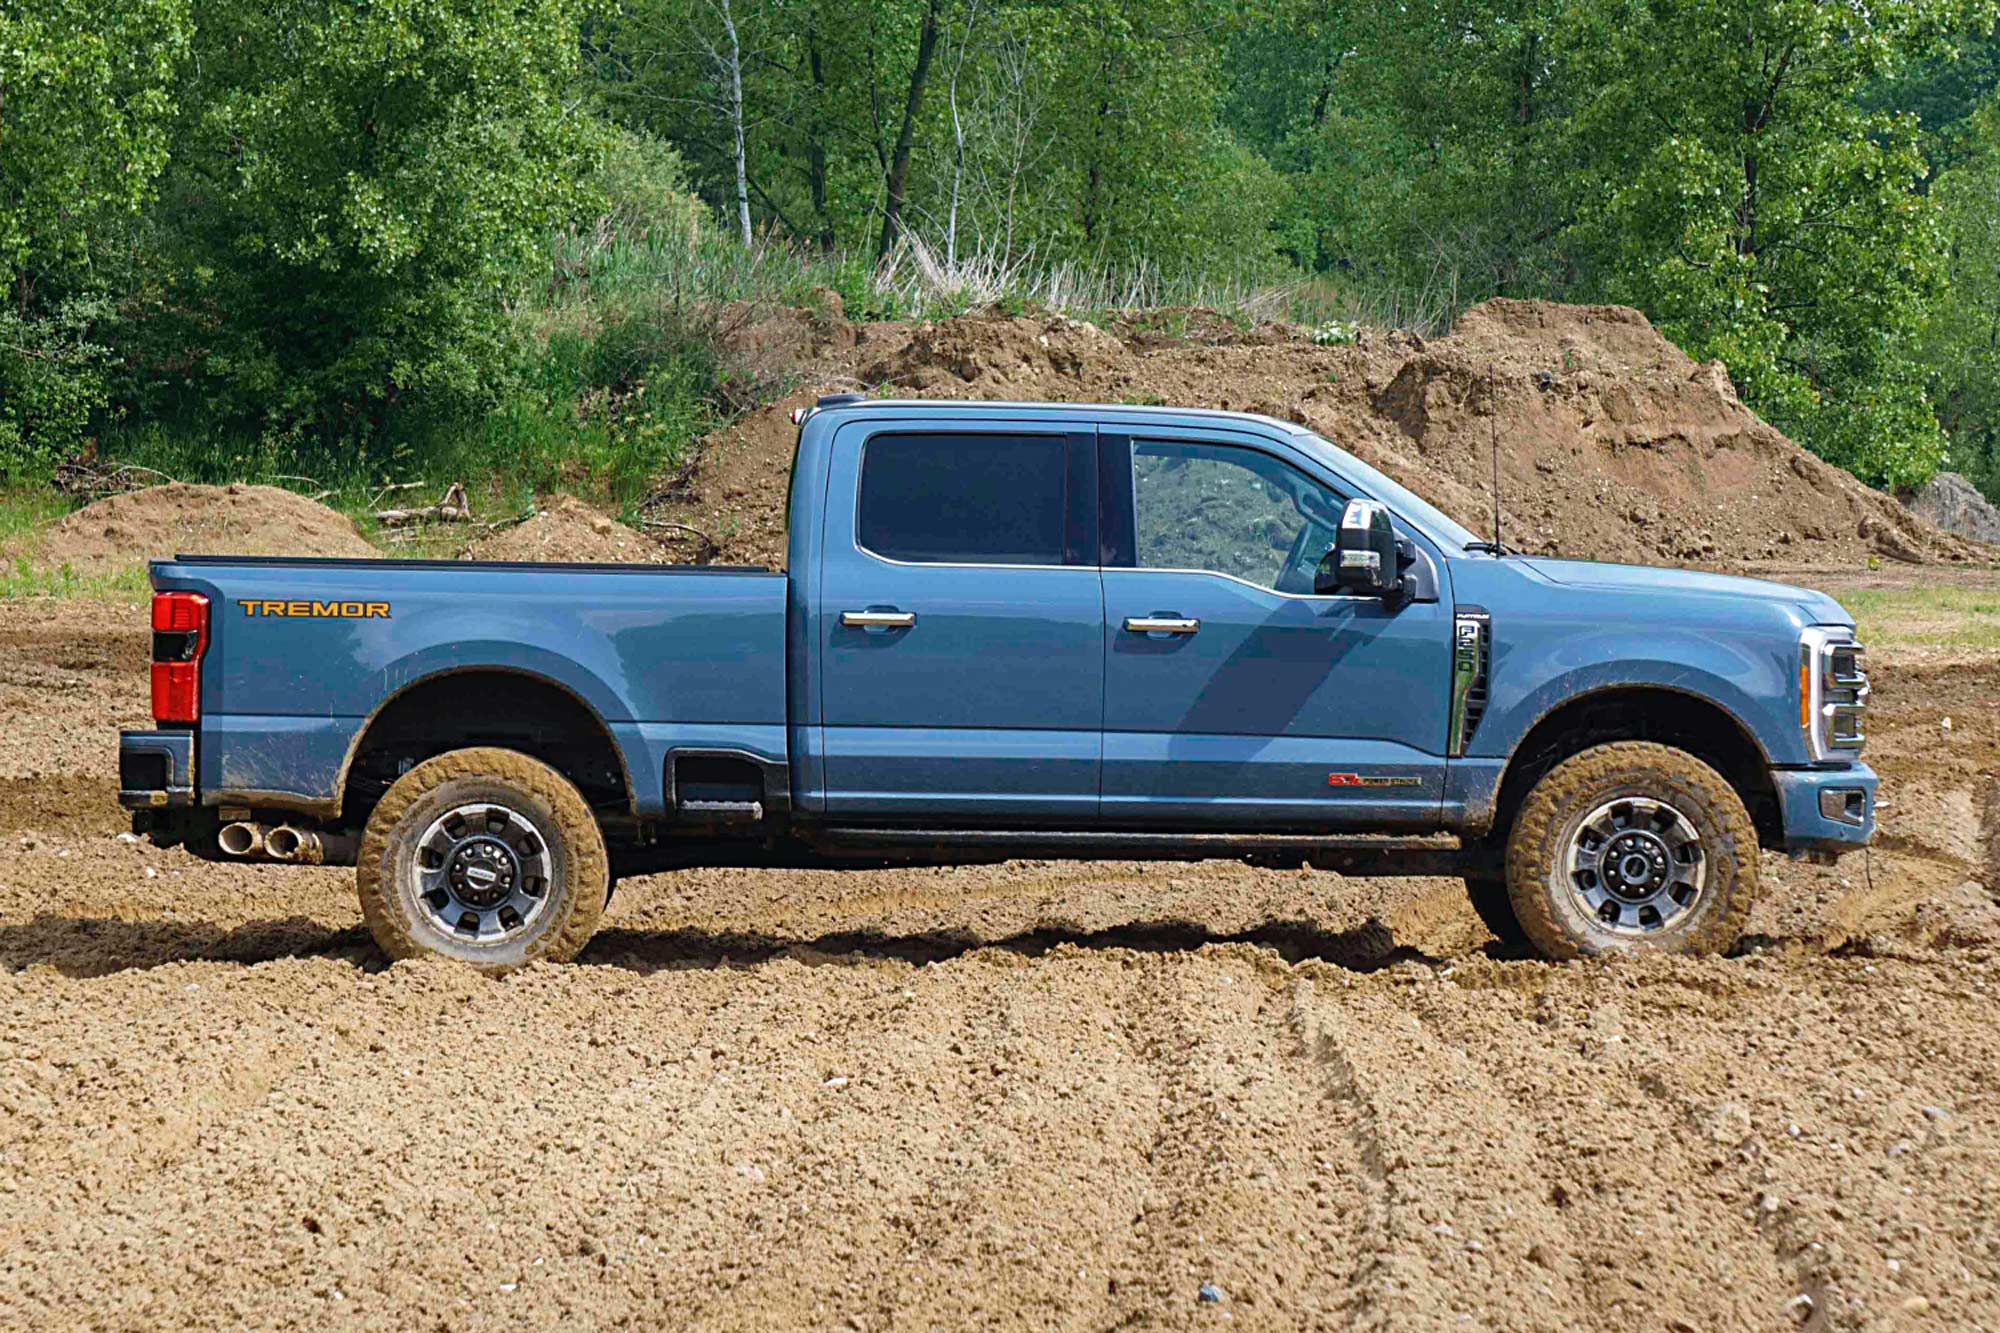 2023 Ford F-250 Super Duty Tremor in blue side view parked in the dirt